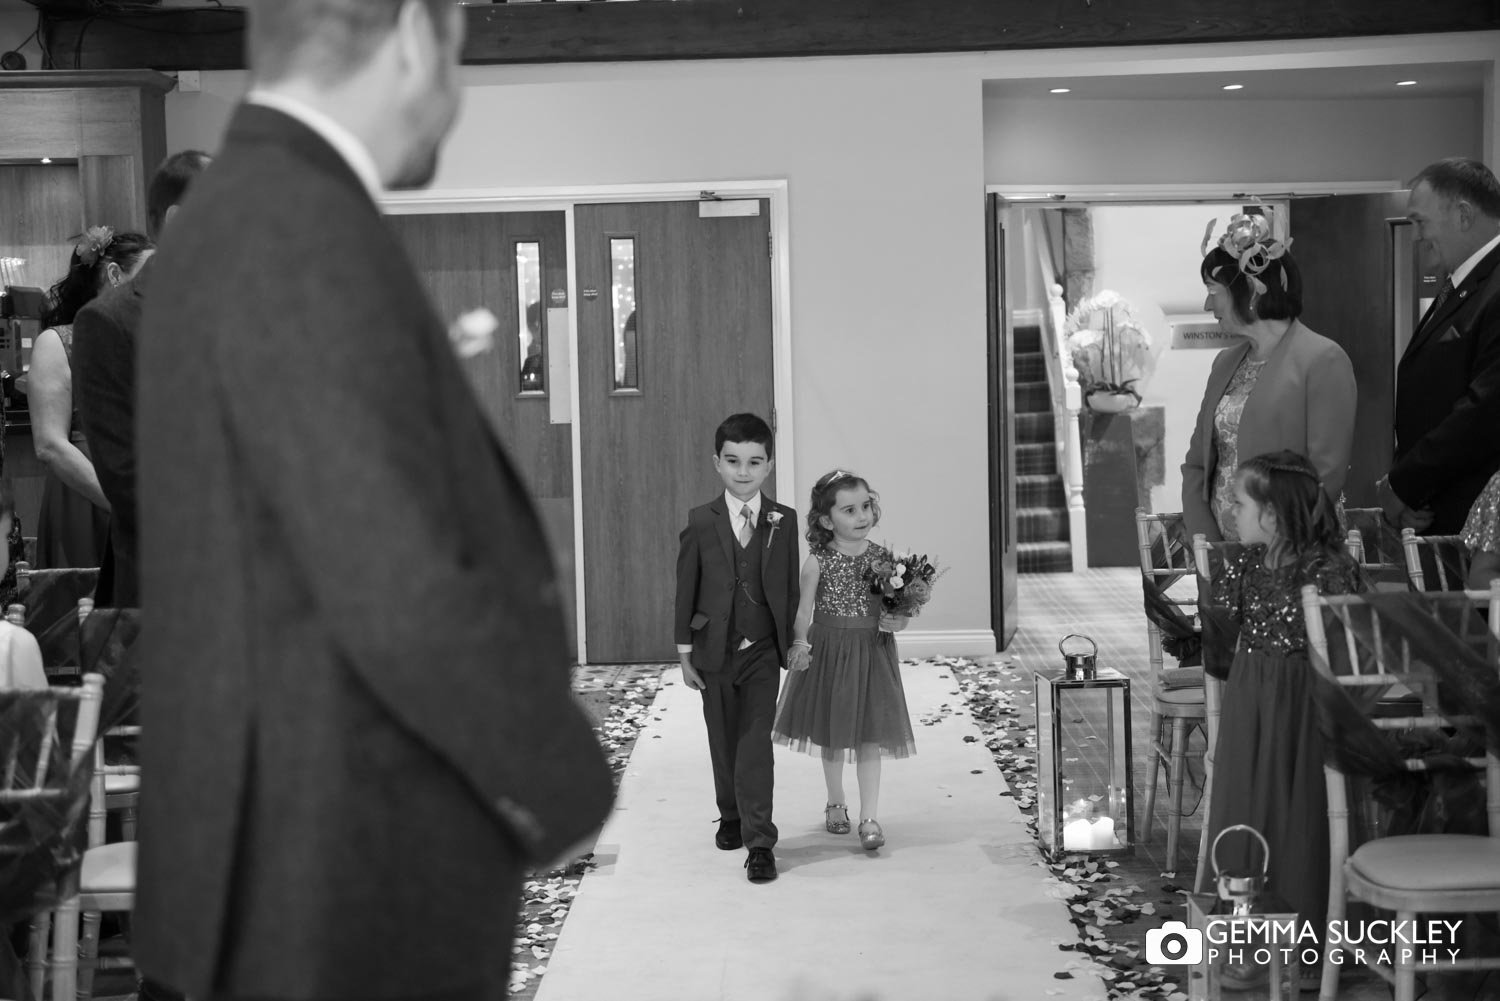 pageboy and flower girl walking down the alise at the coniston hotel